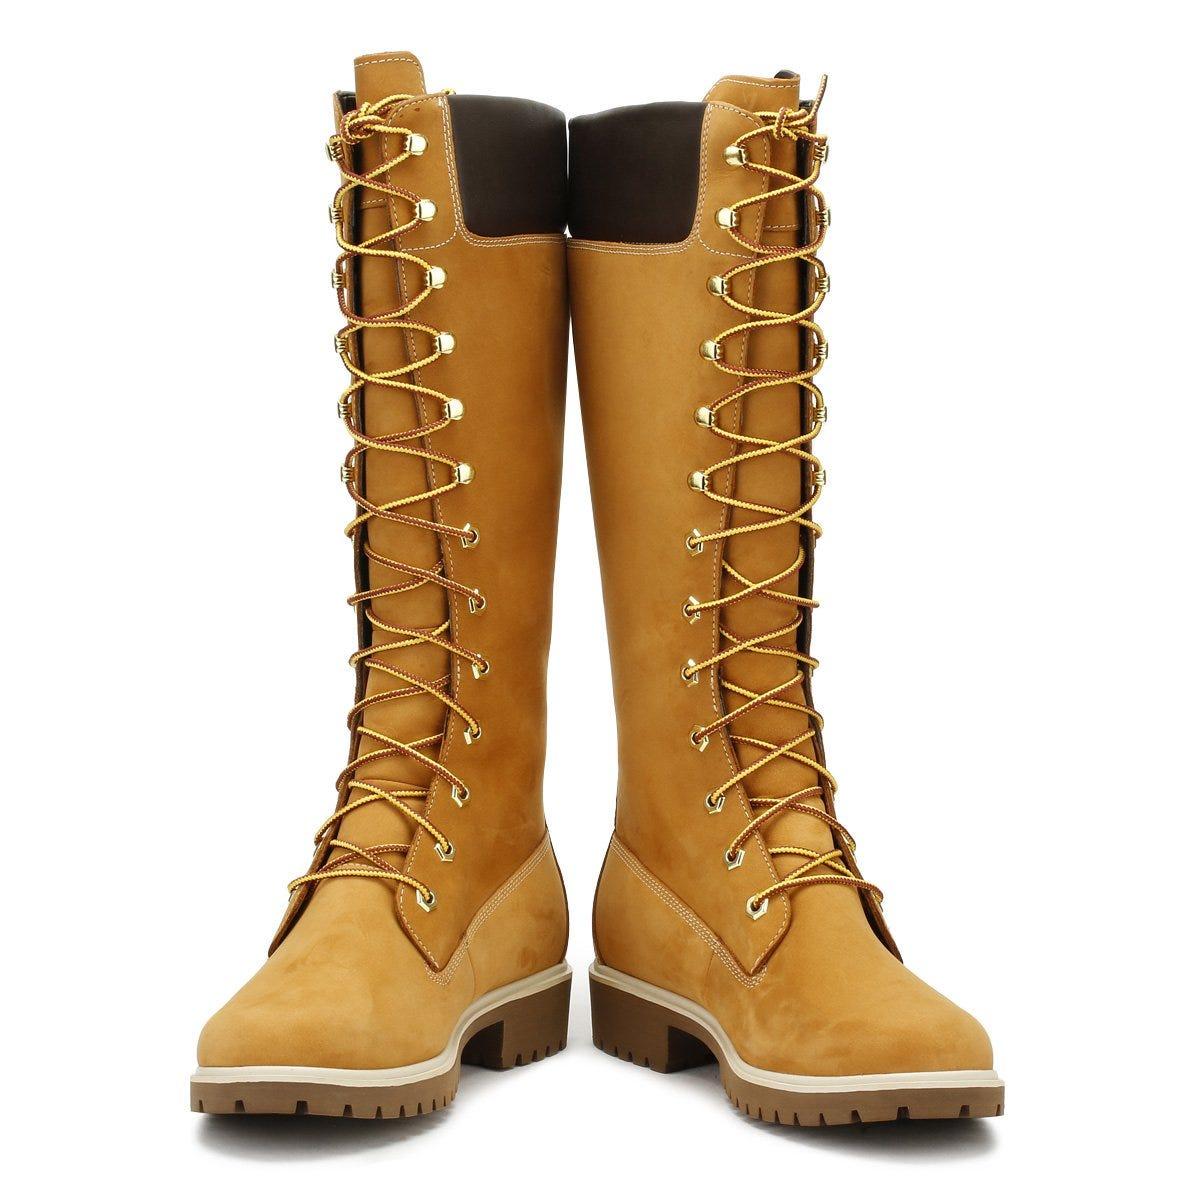 Timberland 14 Inch Premium Boots Wheat Sweden, SAVE 46% - aveclumiere.com